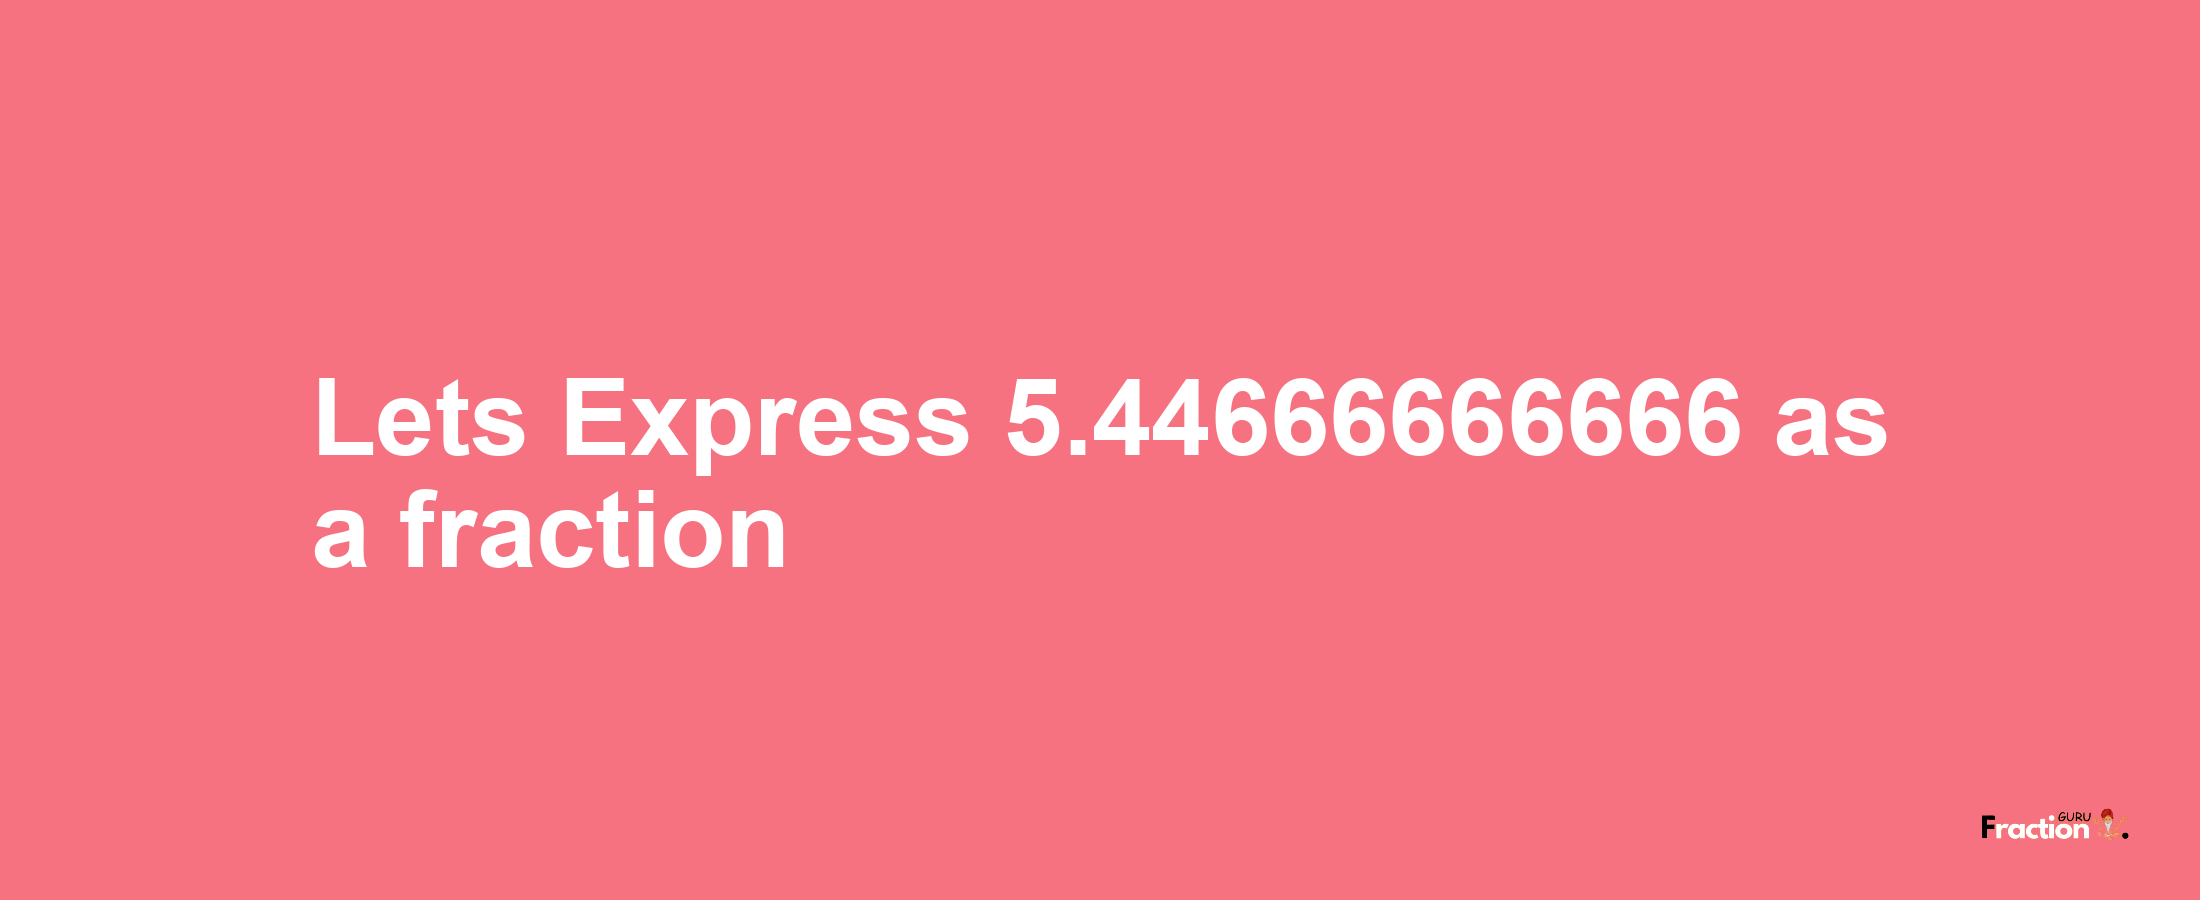 Lets Express 5.44666666666 as afraction